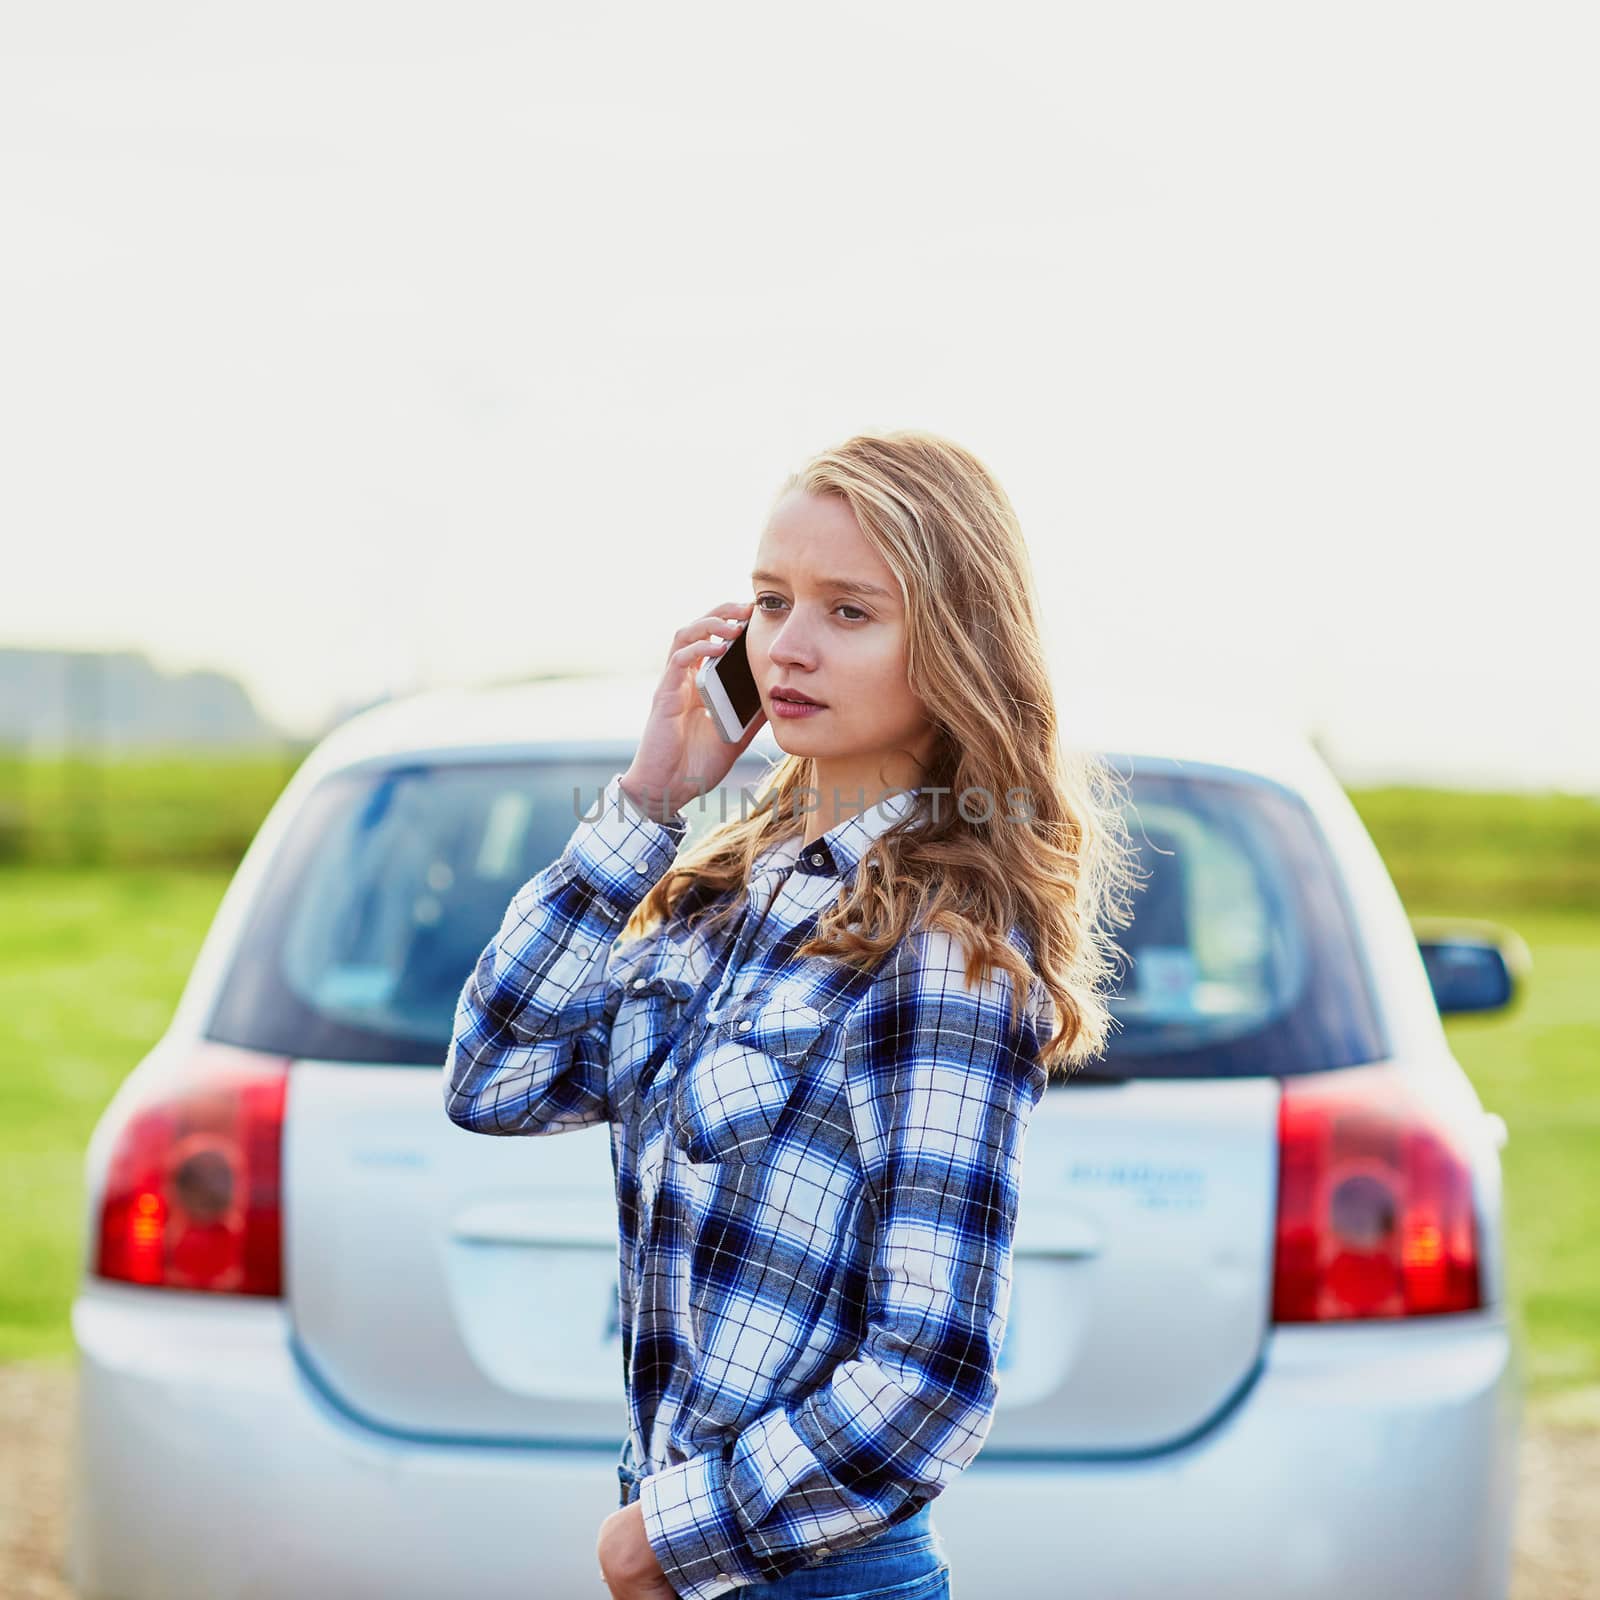 Young woman on the road near a broken car calling for help